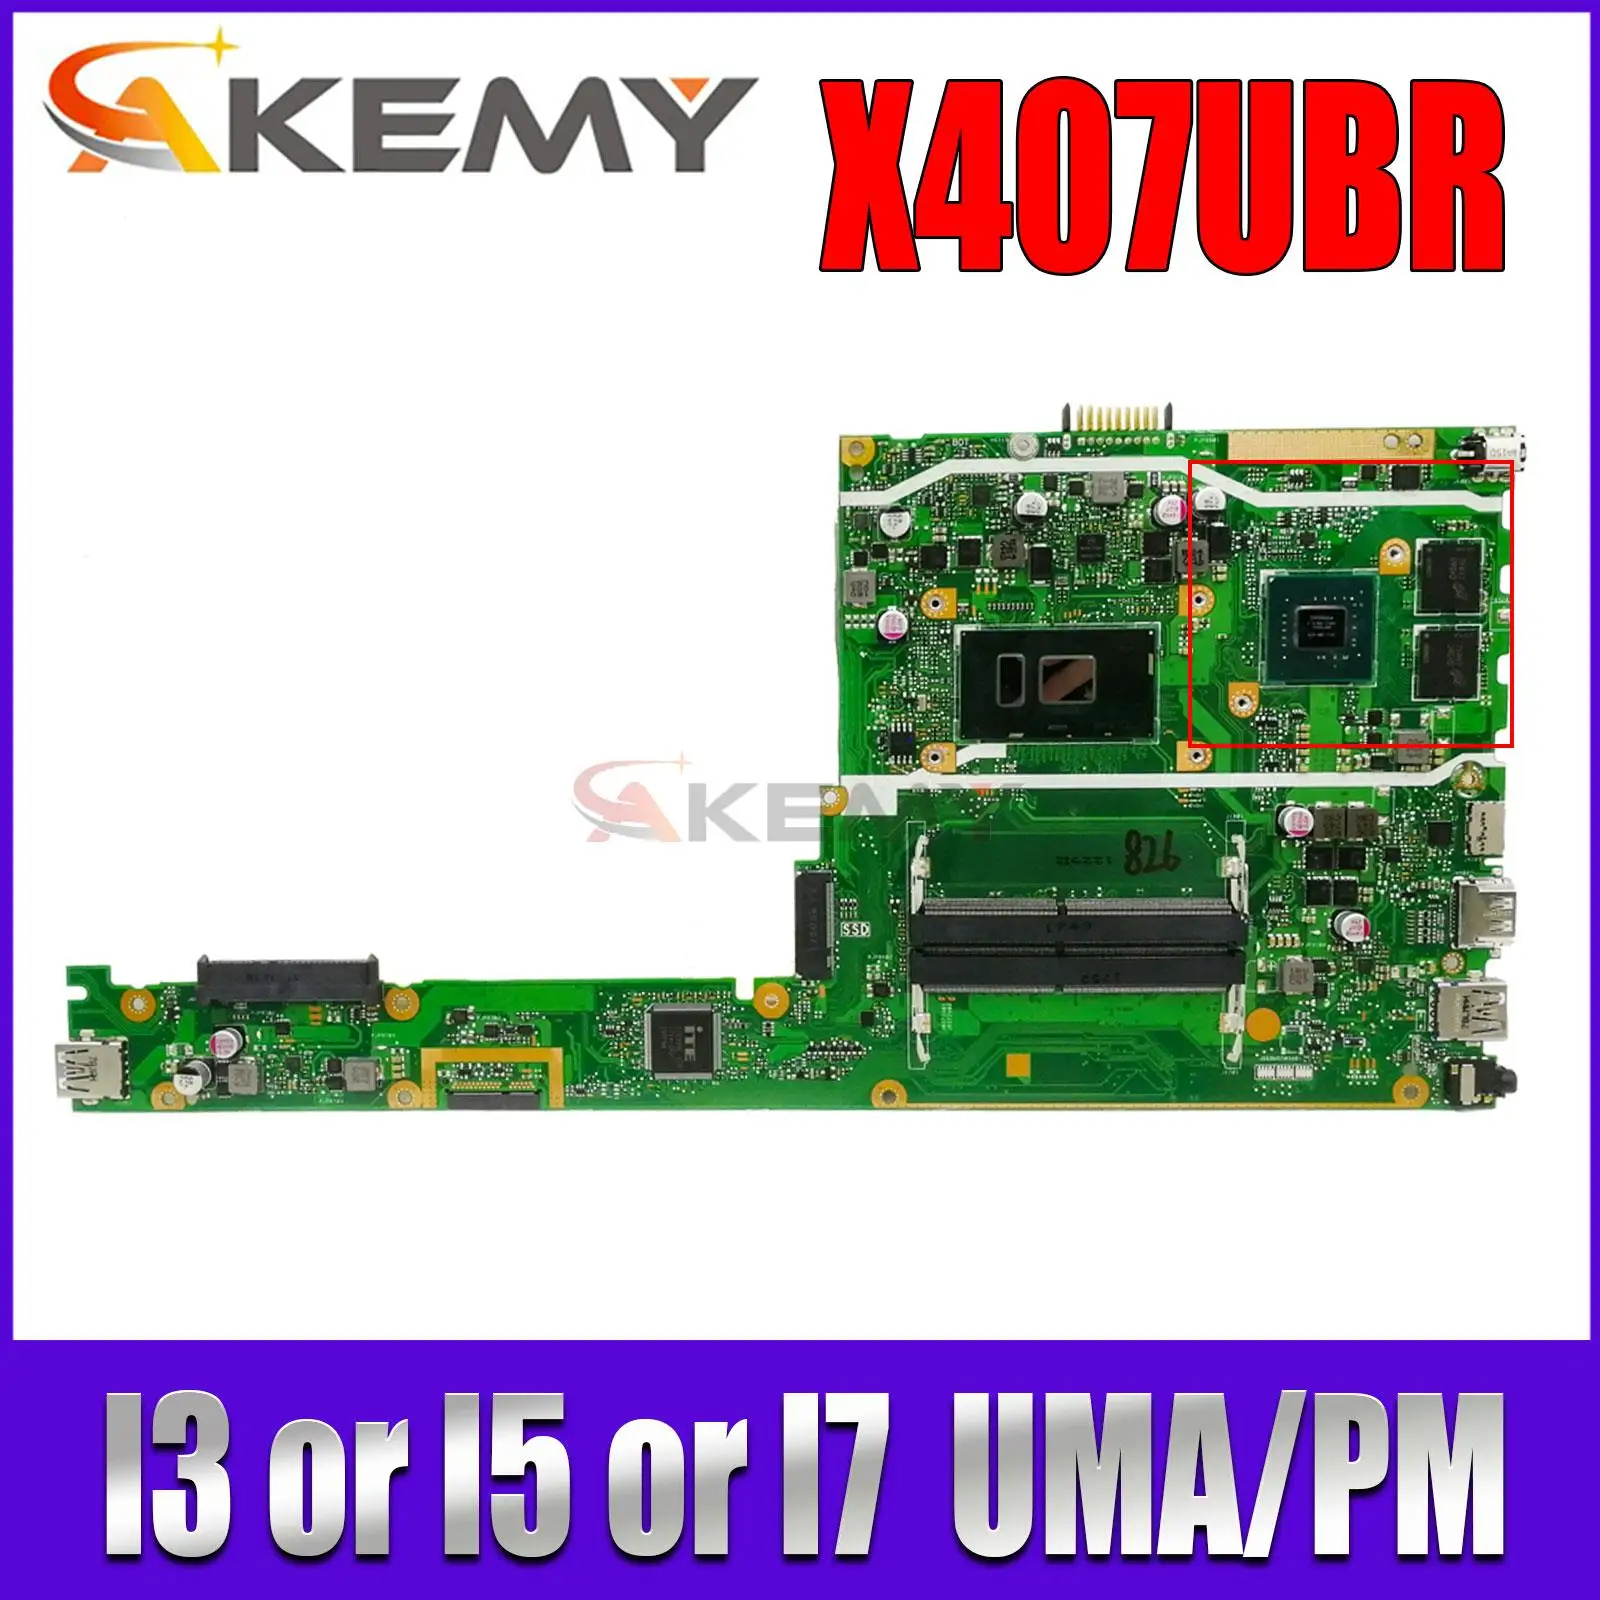 X407UB Mainboard FOR ASUS X407UAR X407UBR X407UA A407 Laptop Motherboard With I3- I5-I7-7th 8th Gen UMA PM 100%  Working new laptop spanish keyboard for asus vivobook x407 x407m x407ma x407u x407ua x407ub a407 sp layout black no frame